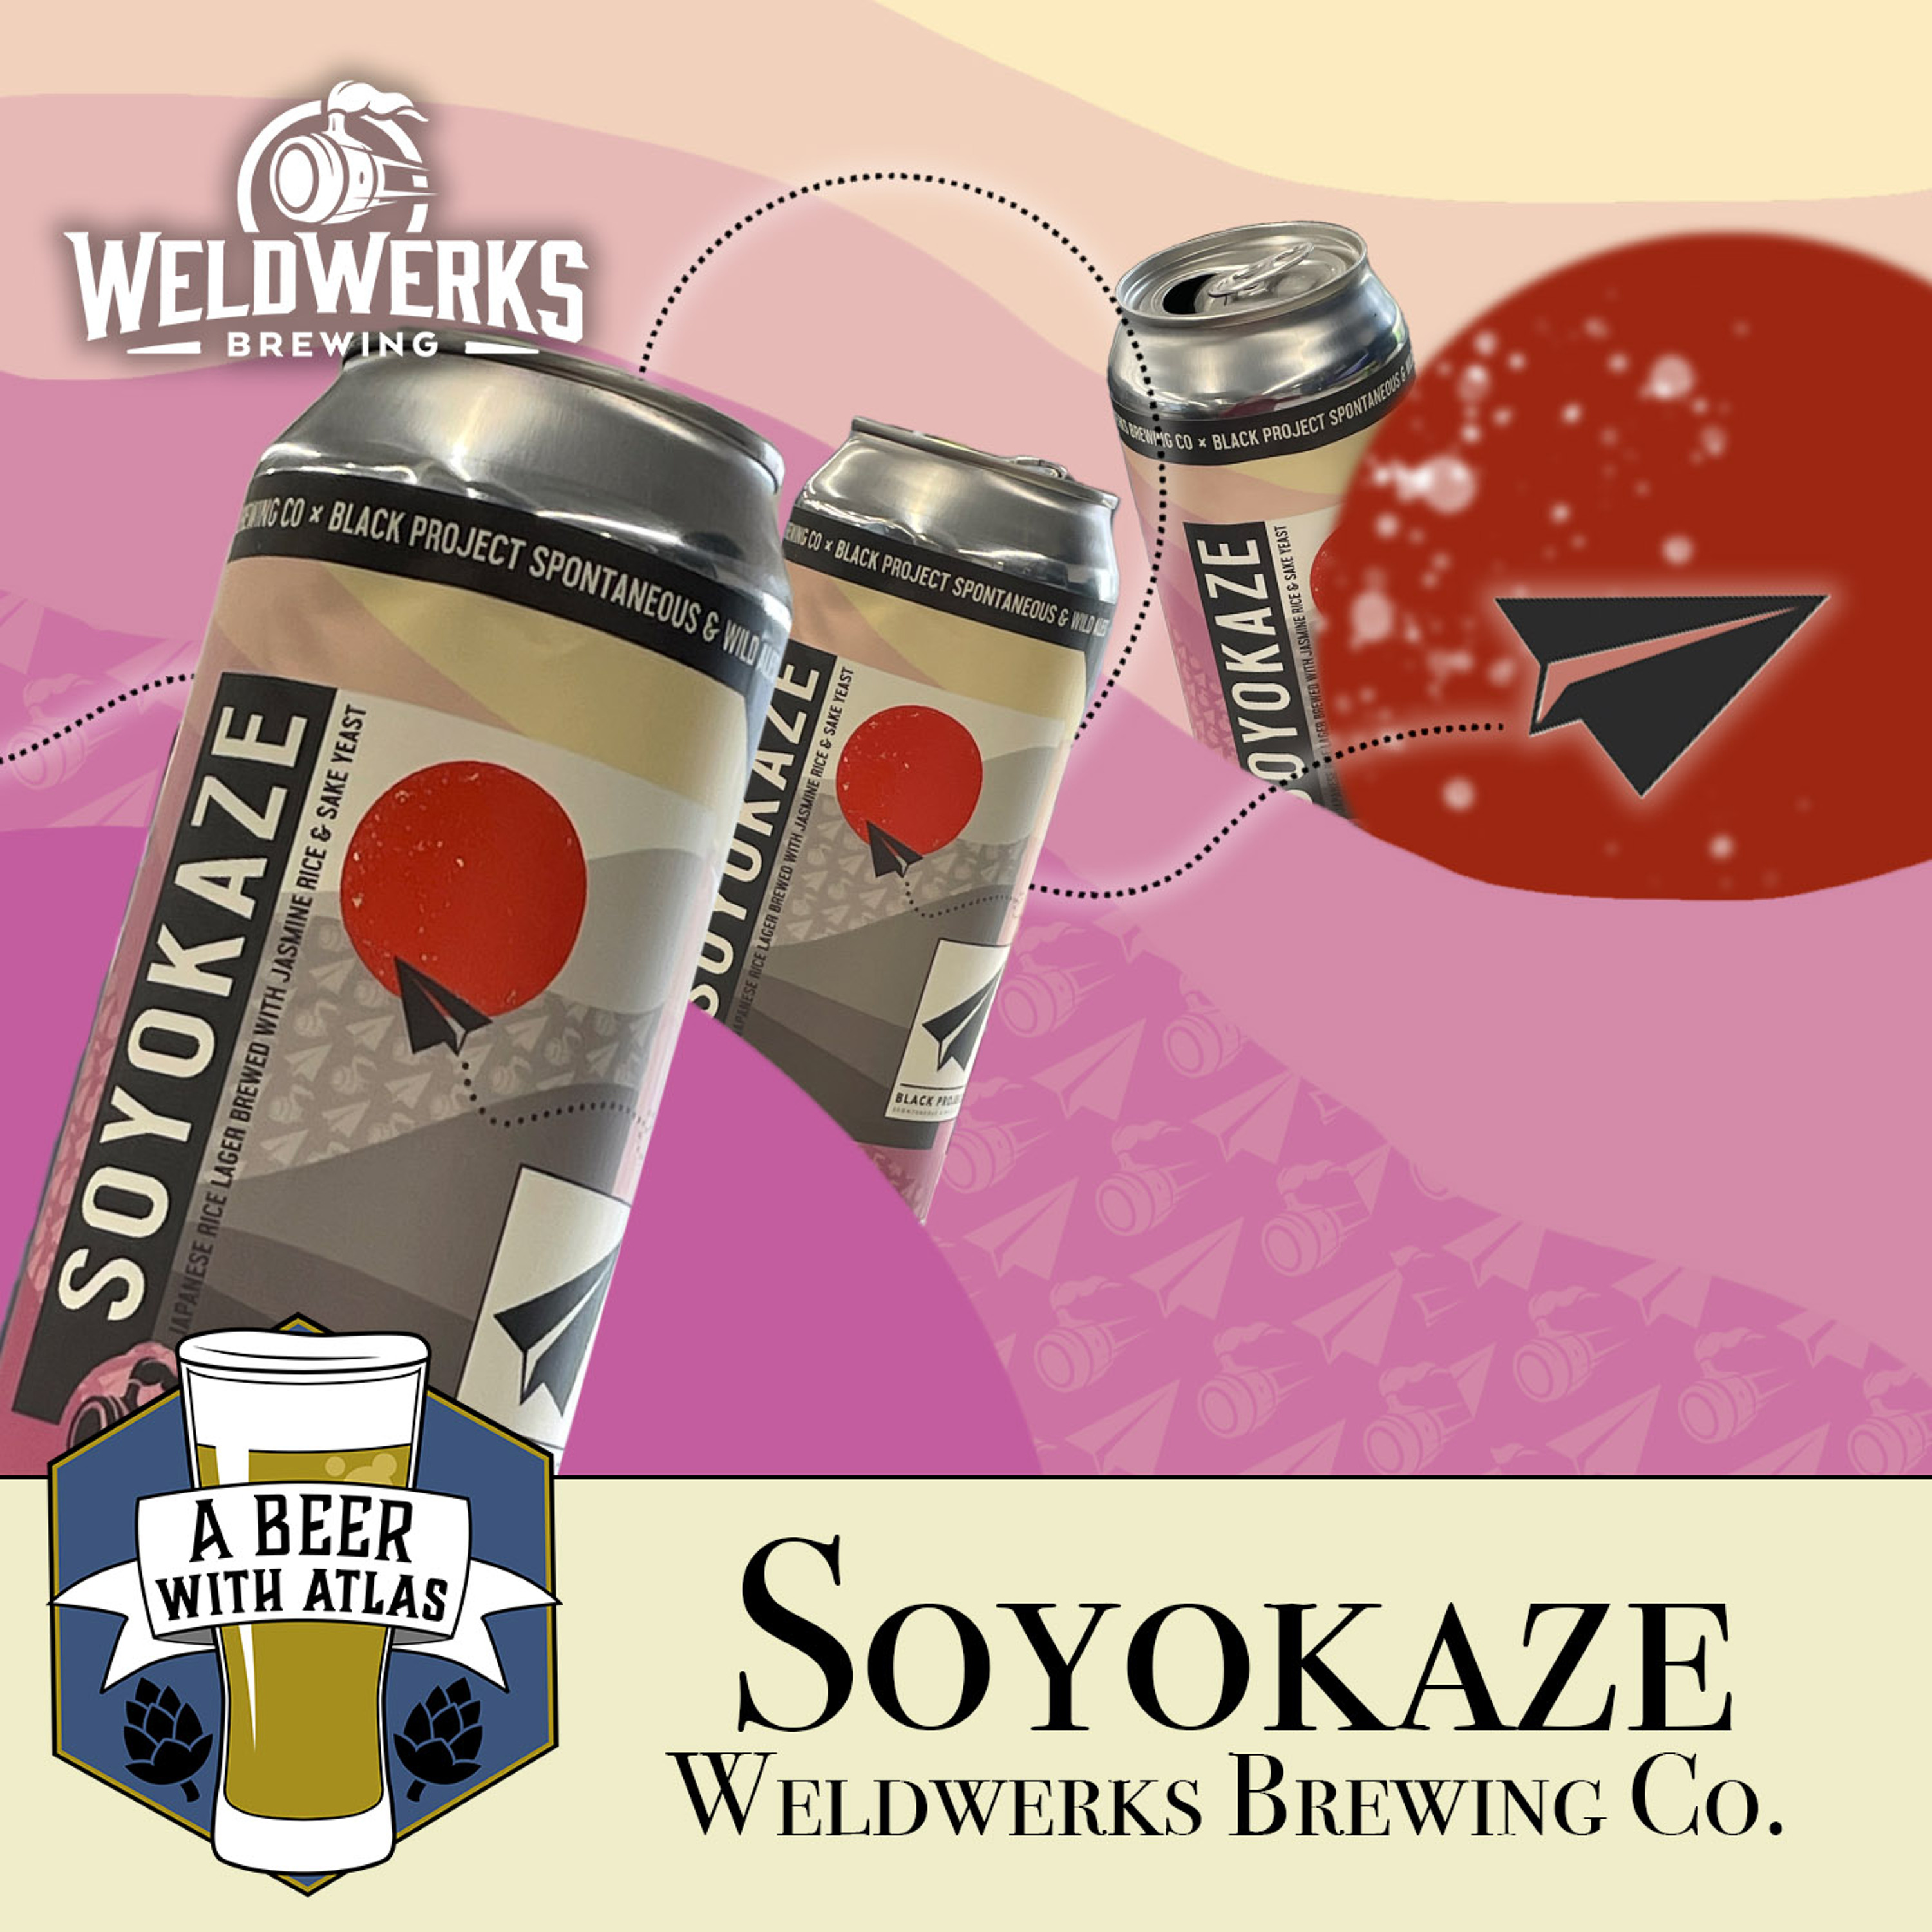 Soyokaze, a Japanese Style Rice Lager by Weldwerks Brewing - A Beer with Atlas 197